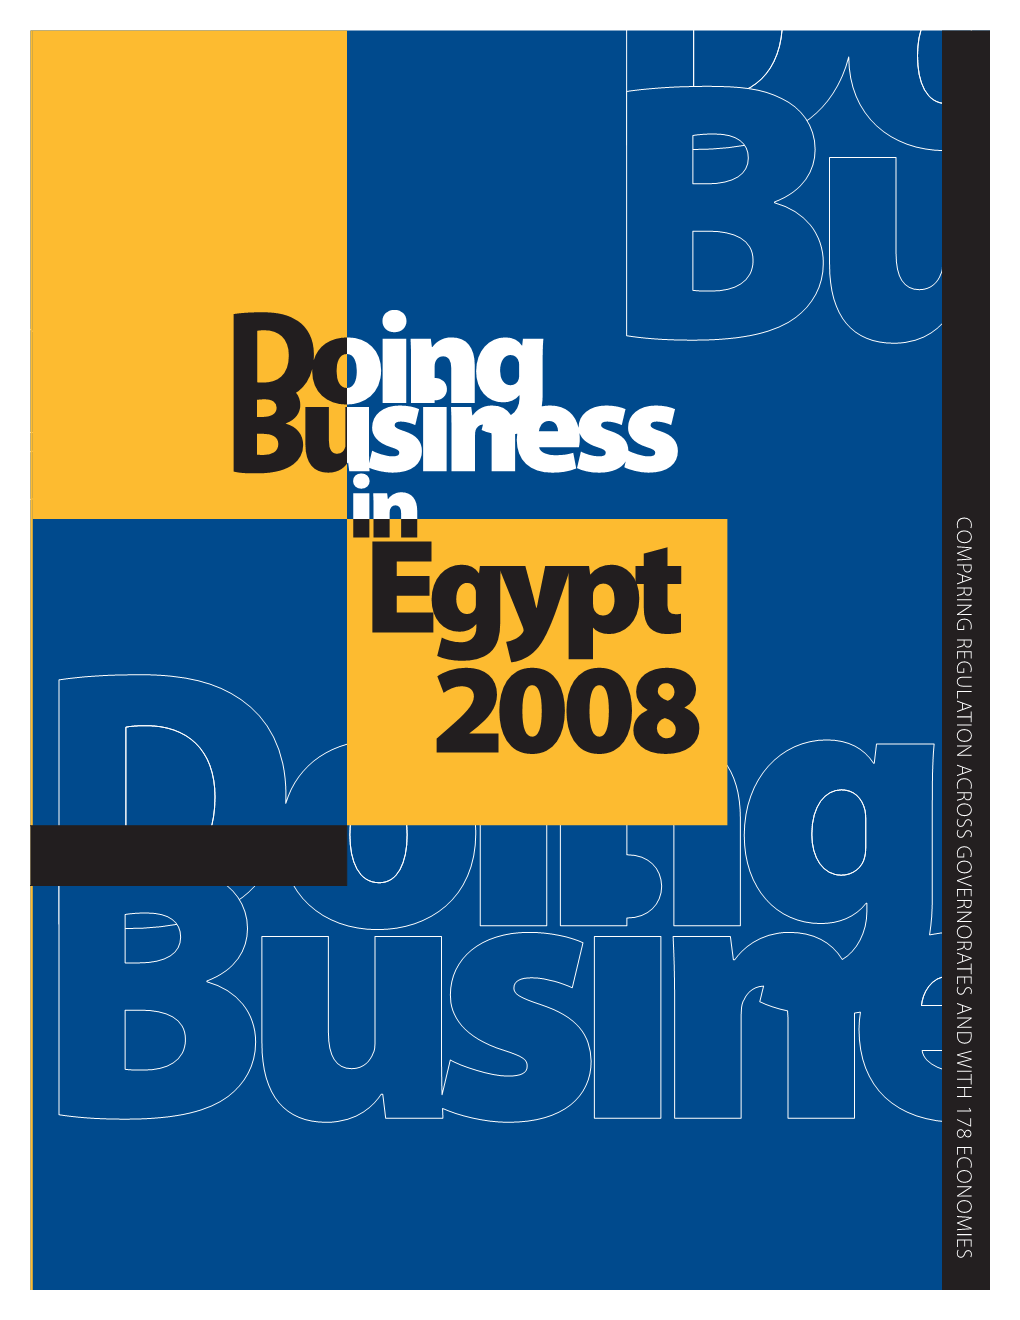 Doing Business in Egypt 2008 and Other Subnational and Regional Studies Can Be Downloaded at No Charge at Www